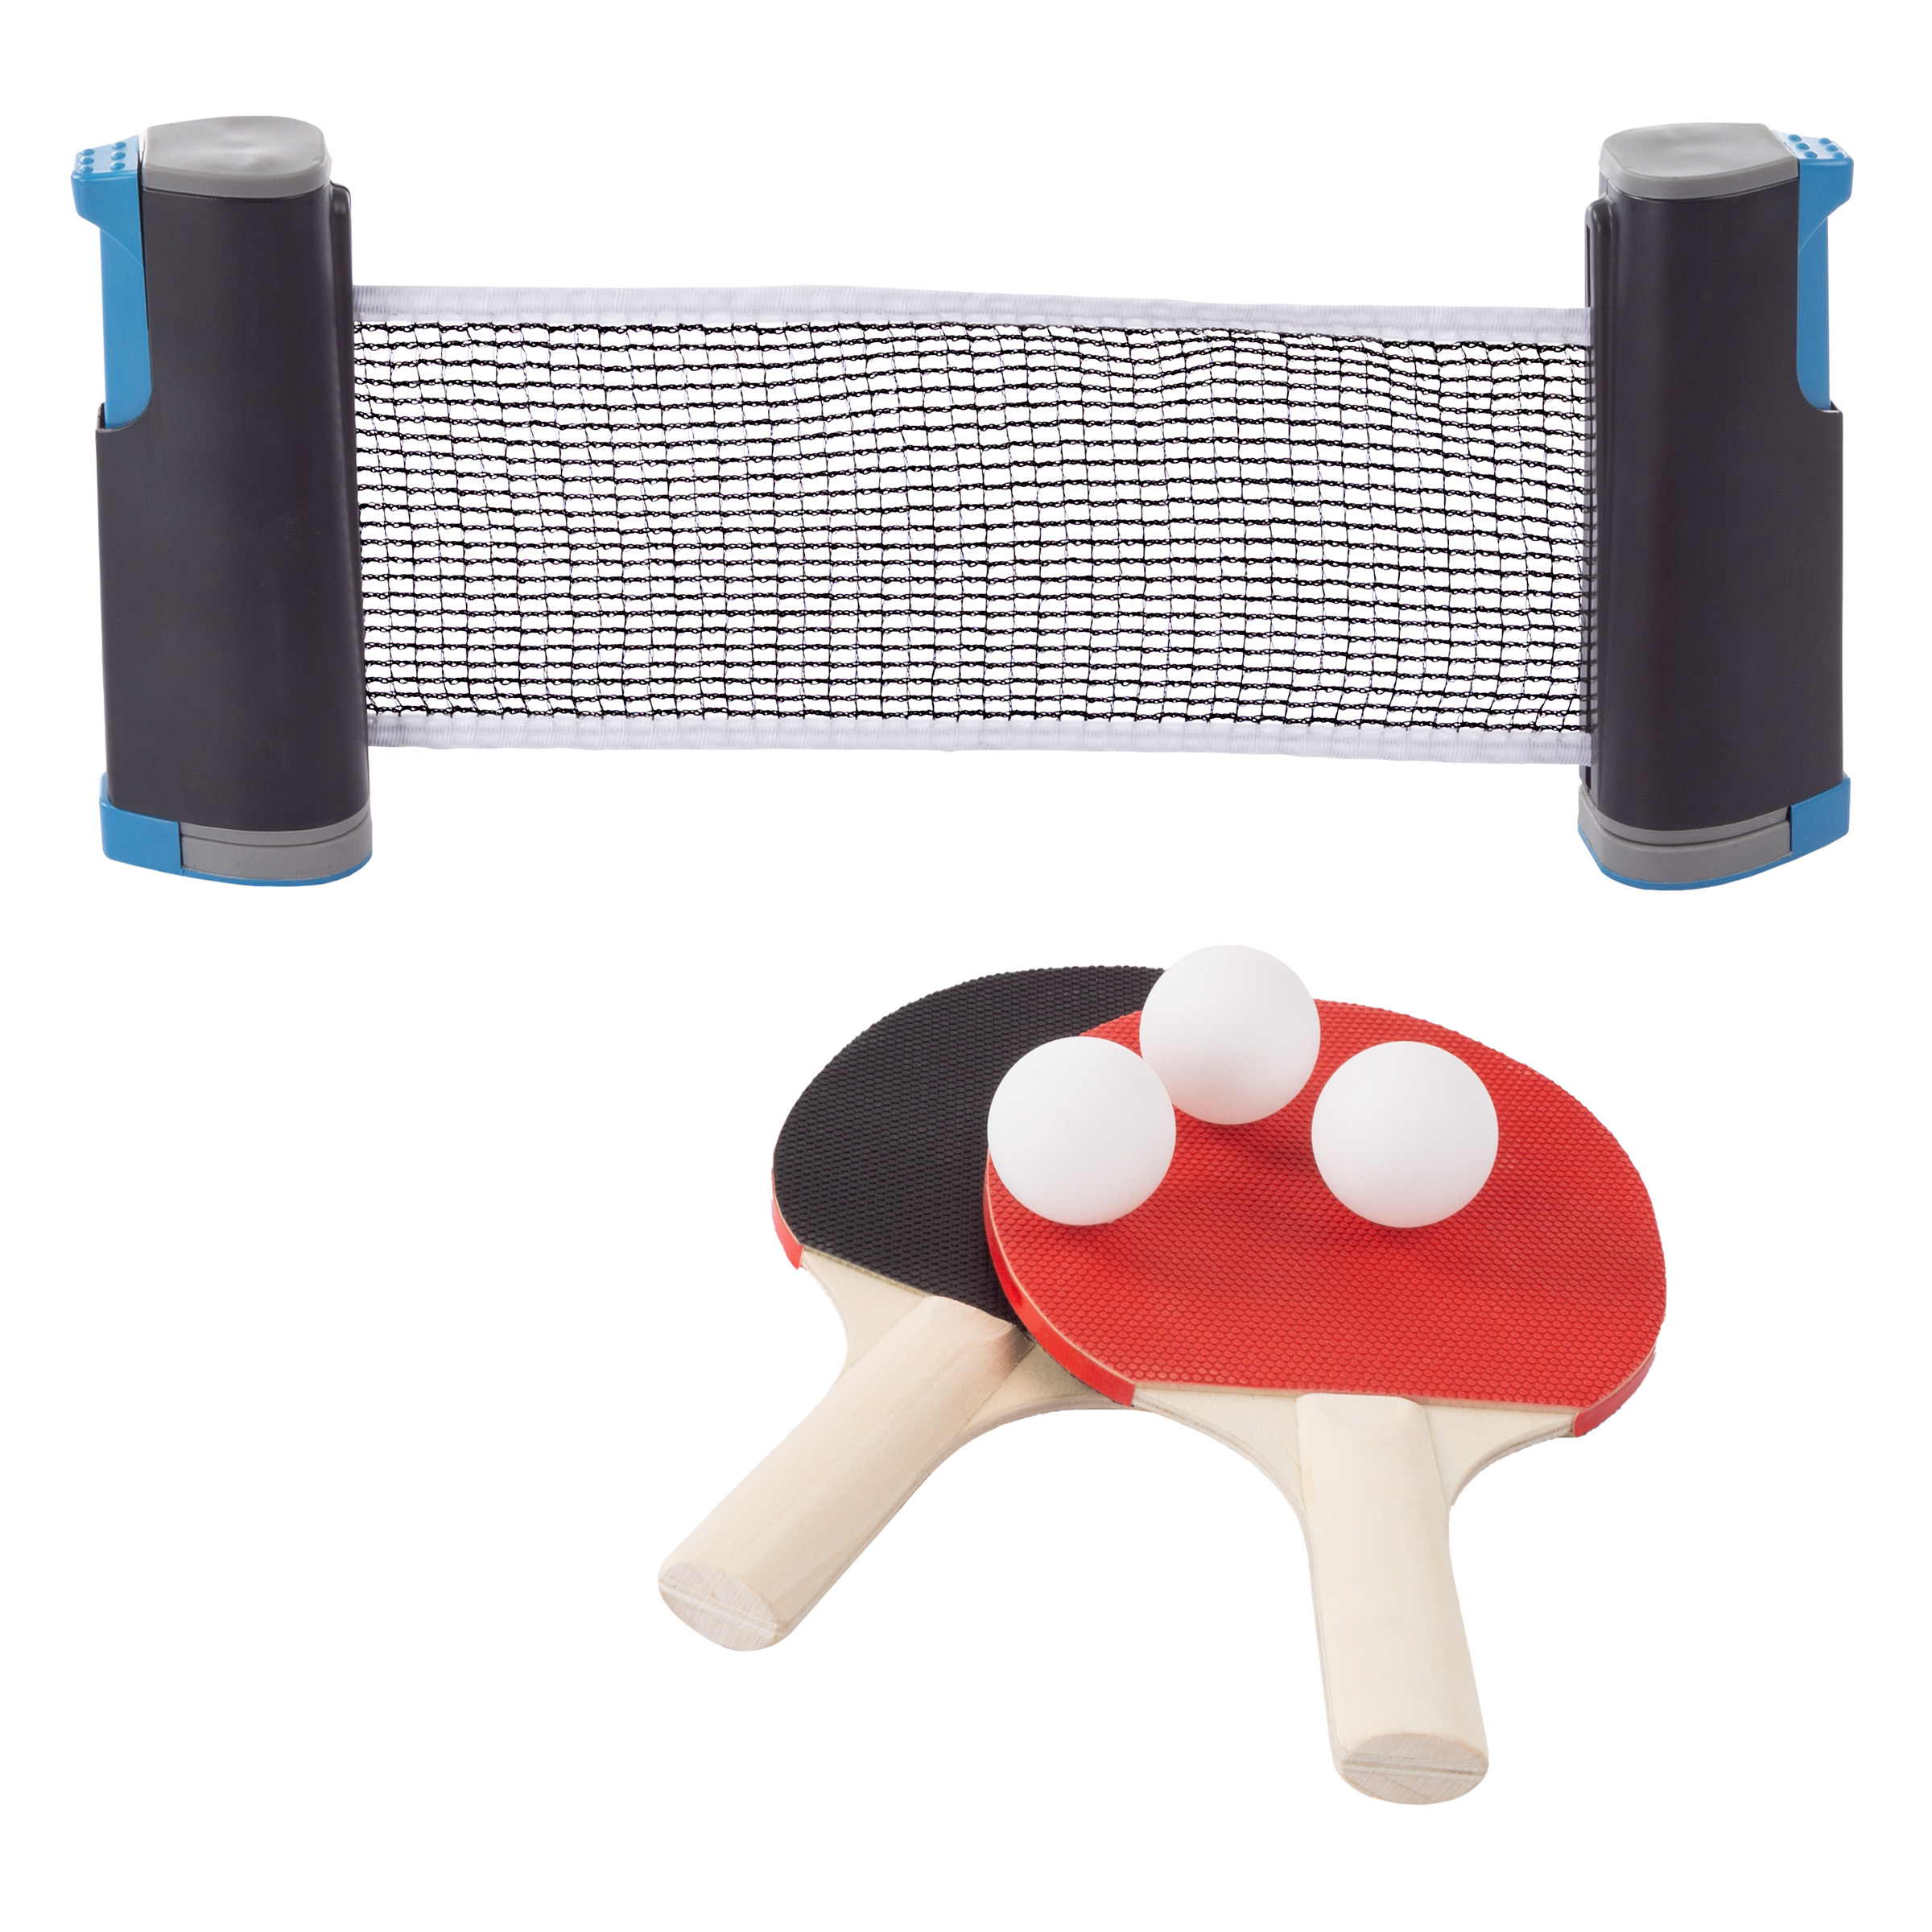 Hey Play Table Tennis Set with Retractable Net, Wooden Paddles, and Balls - image 1 of 7